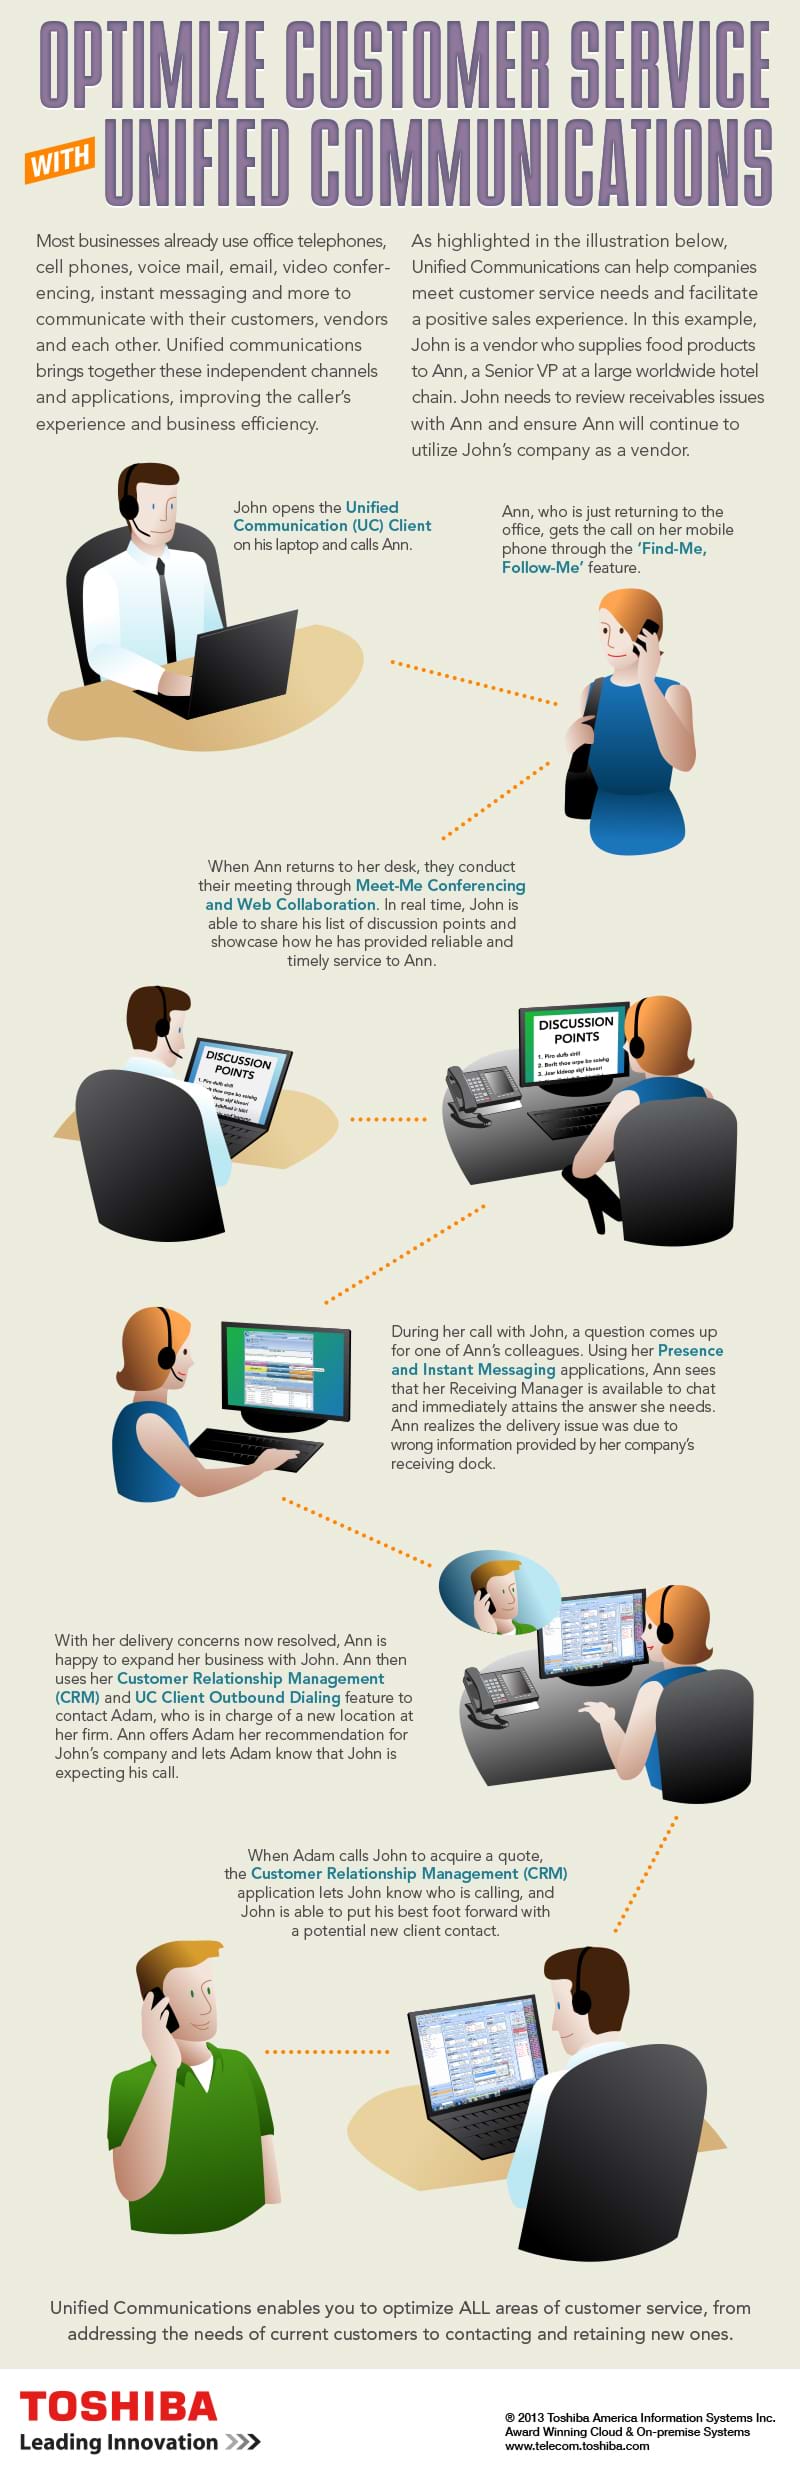 'Most businesses already use office telephones, cell phones, voice mail, email, video conferencing, instant messaging and more to communicate with their customers, vendors and each other. Unified communications brings together these independent channels and applications, improving the caller's experience and business efficiency. As highlighted in the illustration below, Unified Communications can help companies meet customer service needs and facilitate a positive sales experience. In the example, John is a vendor who supplies food products to Ann, a Senior VP at a large worldwide hotel chain. John needs to review receivable issues with Ann and ensure Ann will continue to utilize John's company as a vendor.' Optimize Customer Service with Unified Communications Infographic